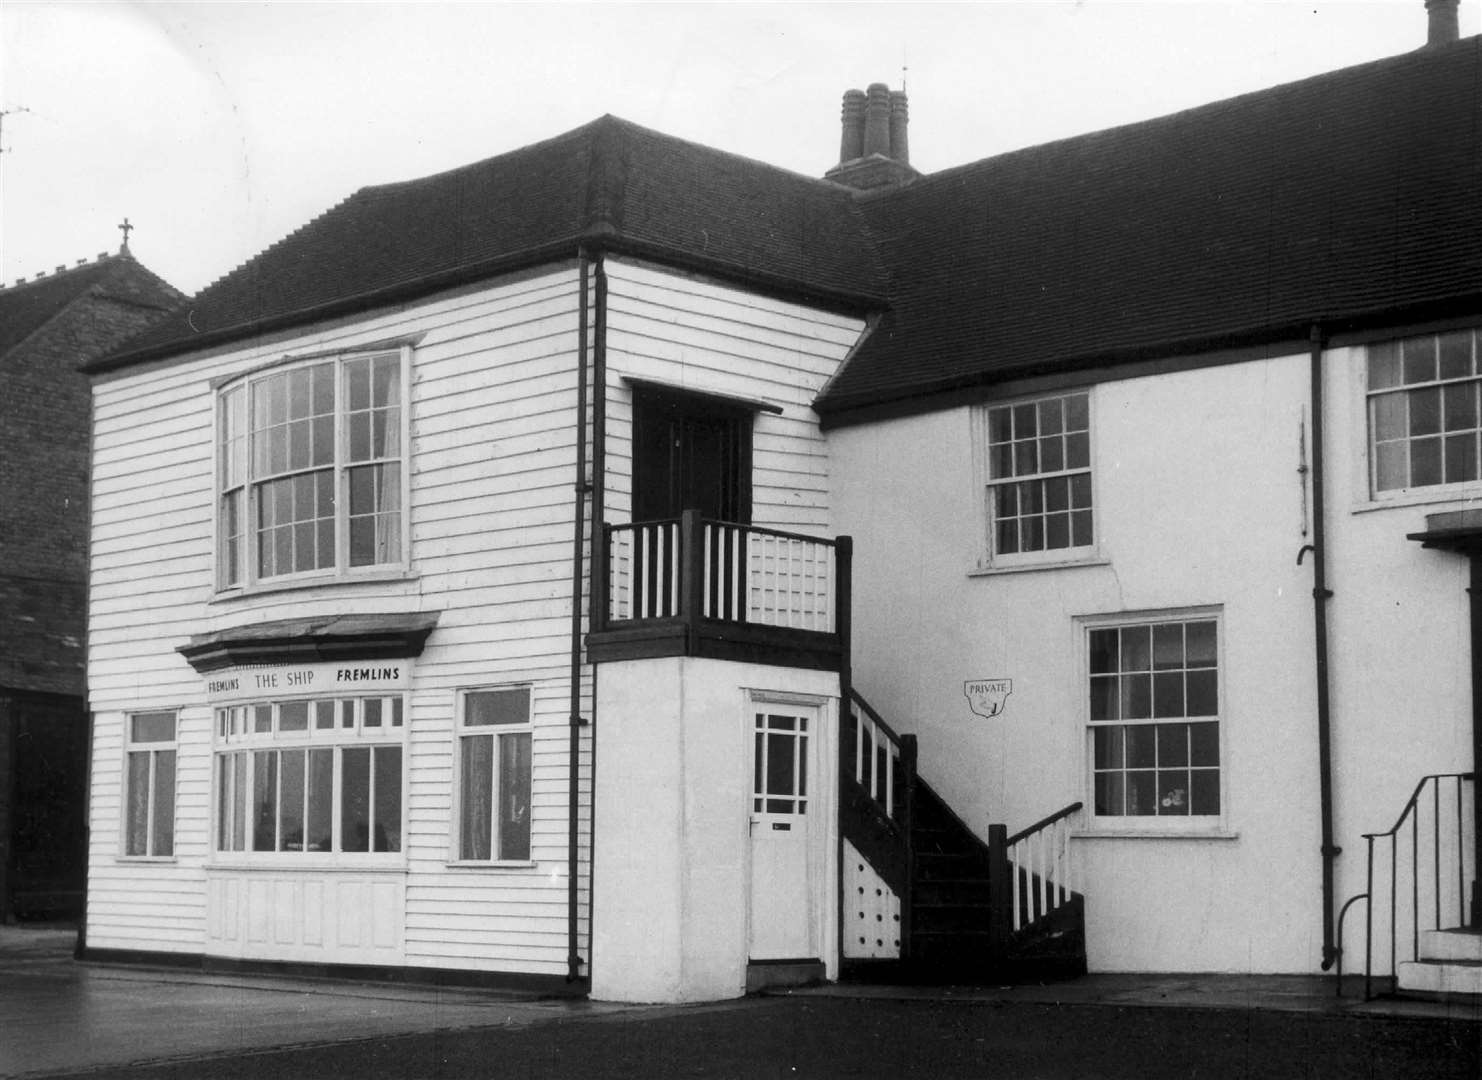 The Ship Inn, Herne Bay pictured here in January 1962